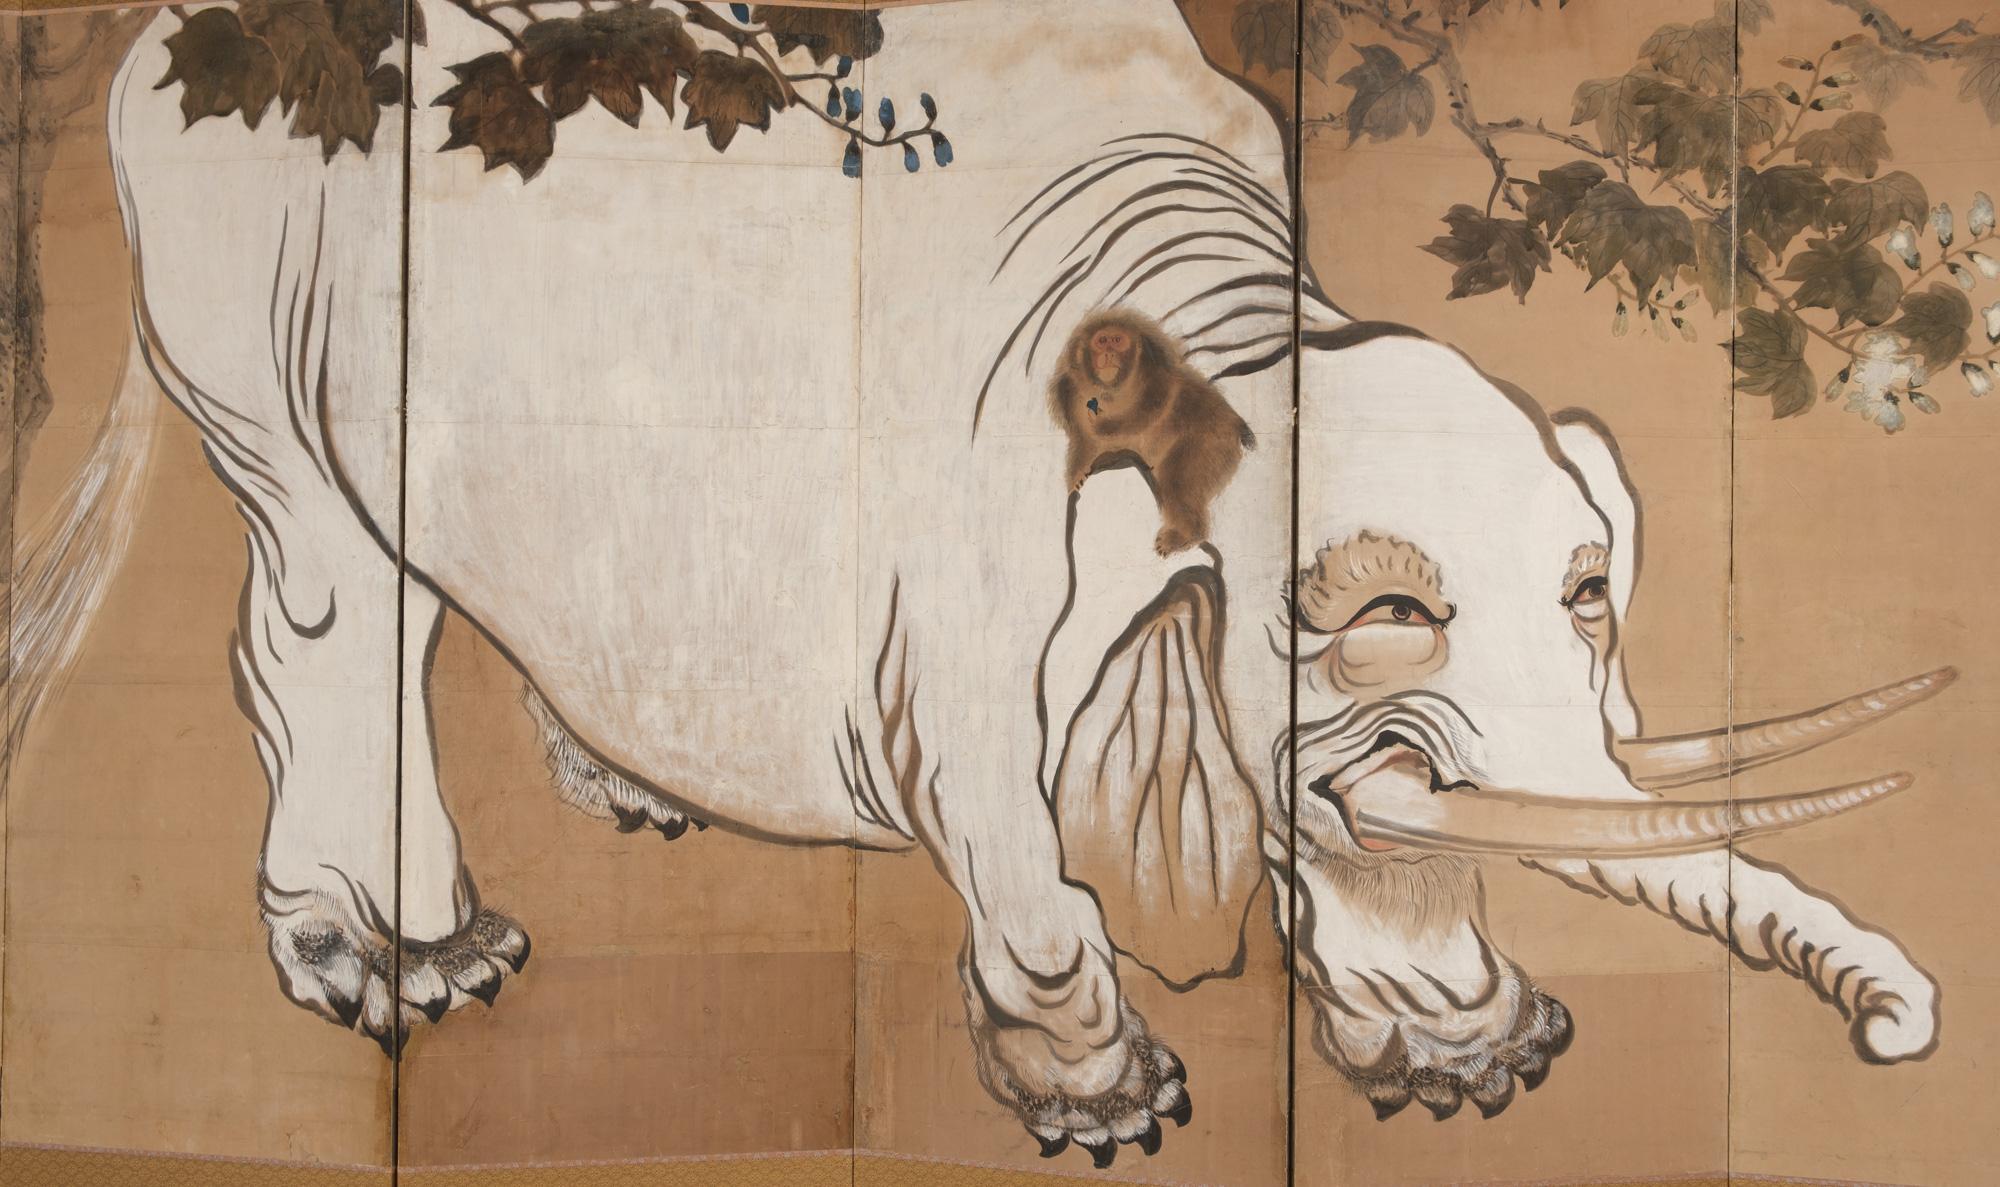 Japanese large six-panel byôbu (room divider) with a rare painting of a large white elephant with a monkey on its shoulder, standing under a Paulownia tree (kiri) in bloom. The Paulownia is considered in Japanese symbolism as the tree of life. 

The